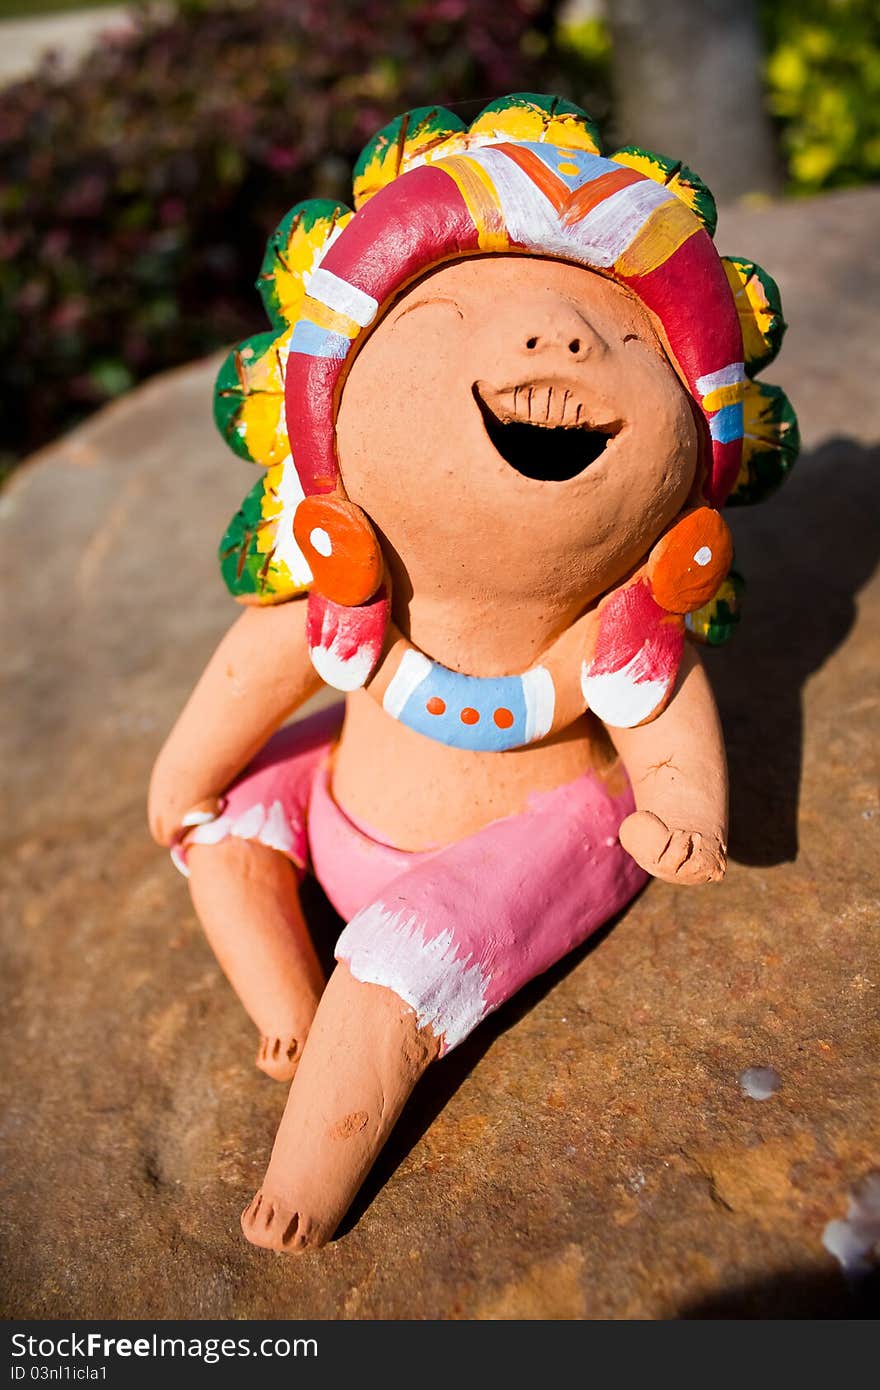 The Ceramic Laugh Doll sit on the Rock